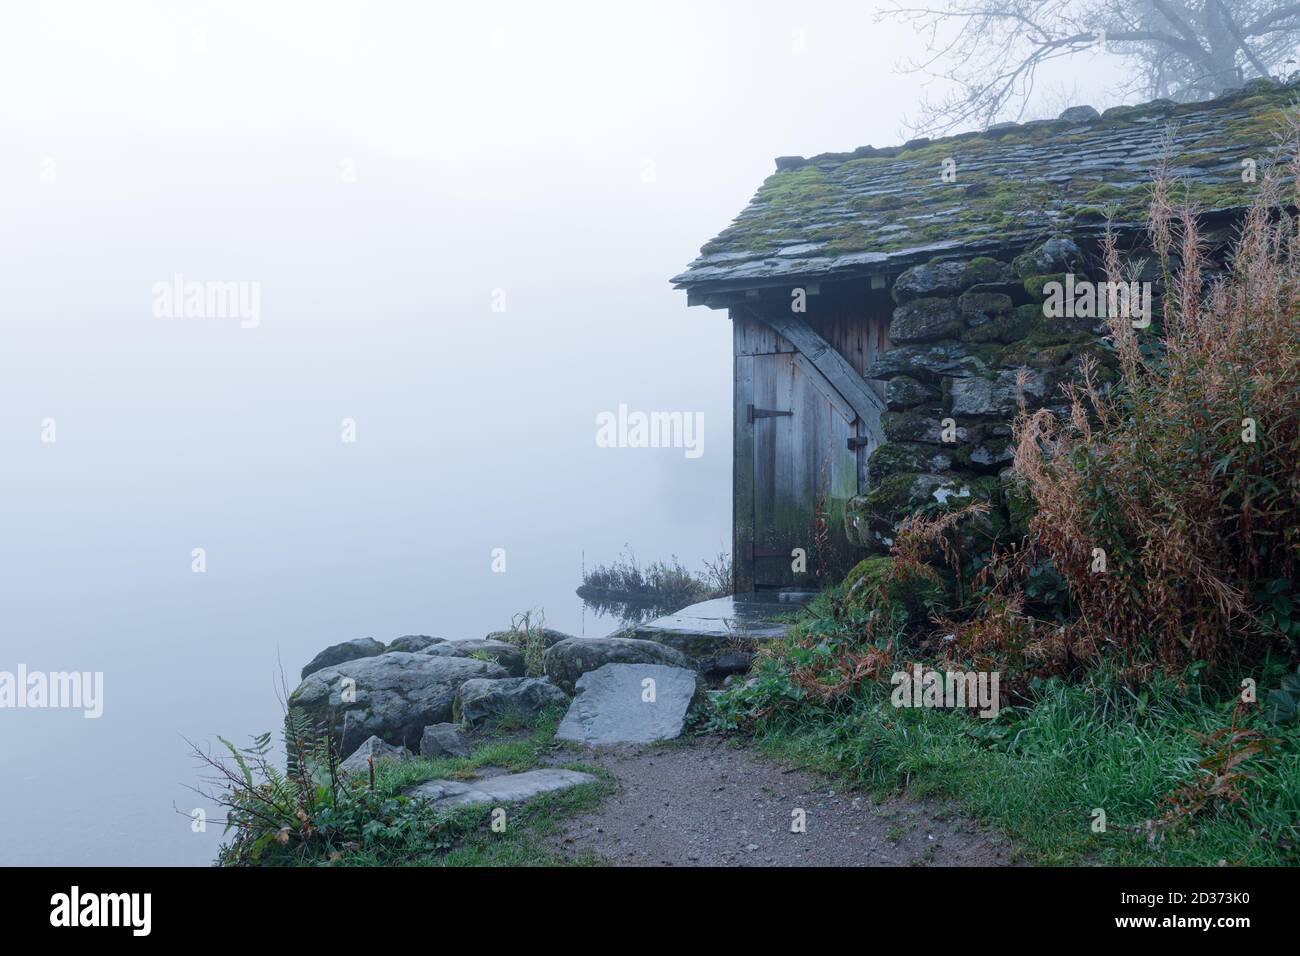 Grasmere, Cumbria, UK - 1/10/20: A boathouse, built from local stone, stands on the shore of Grasmere in moody early morning autumn light and mist. Stock Photo